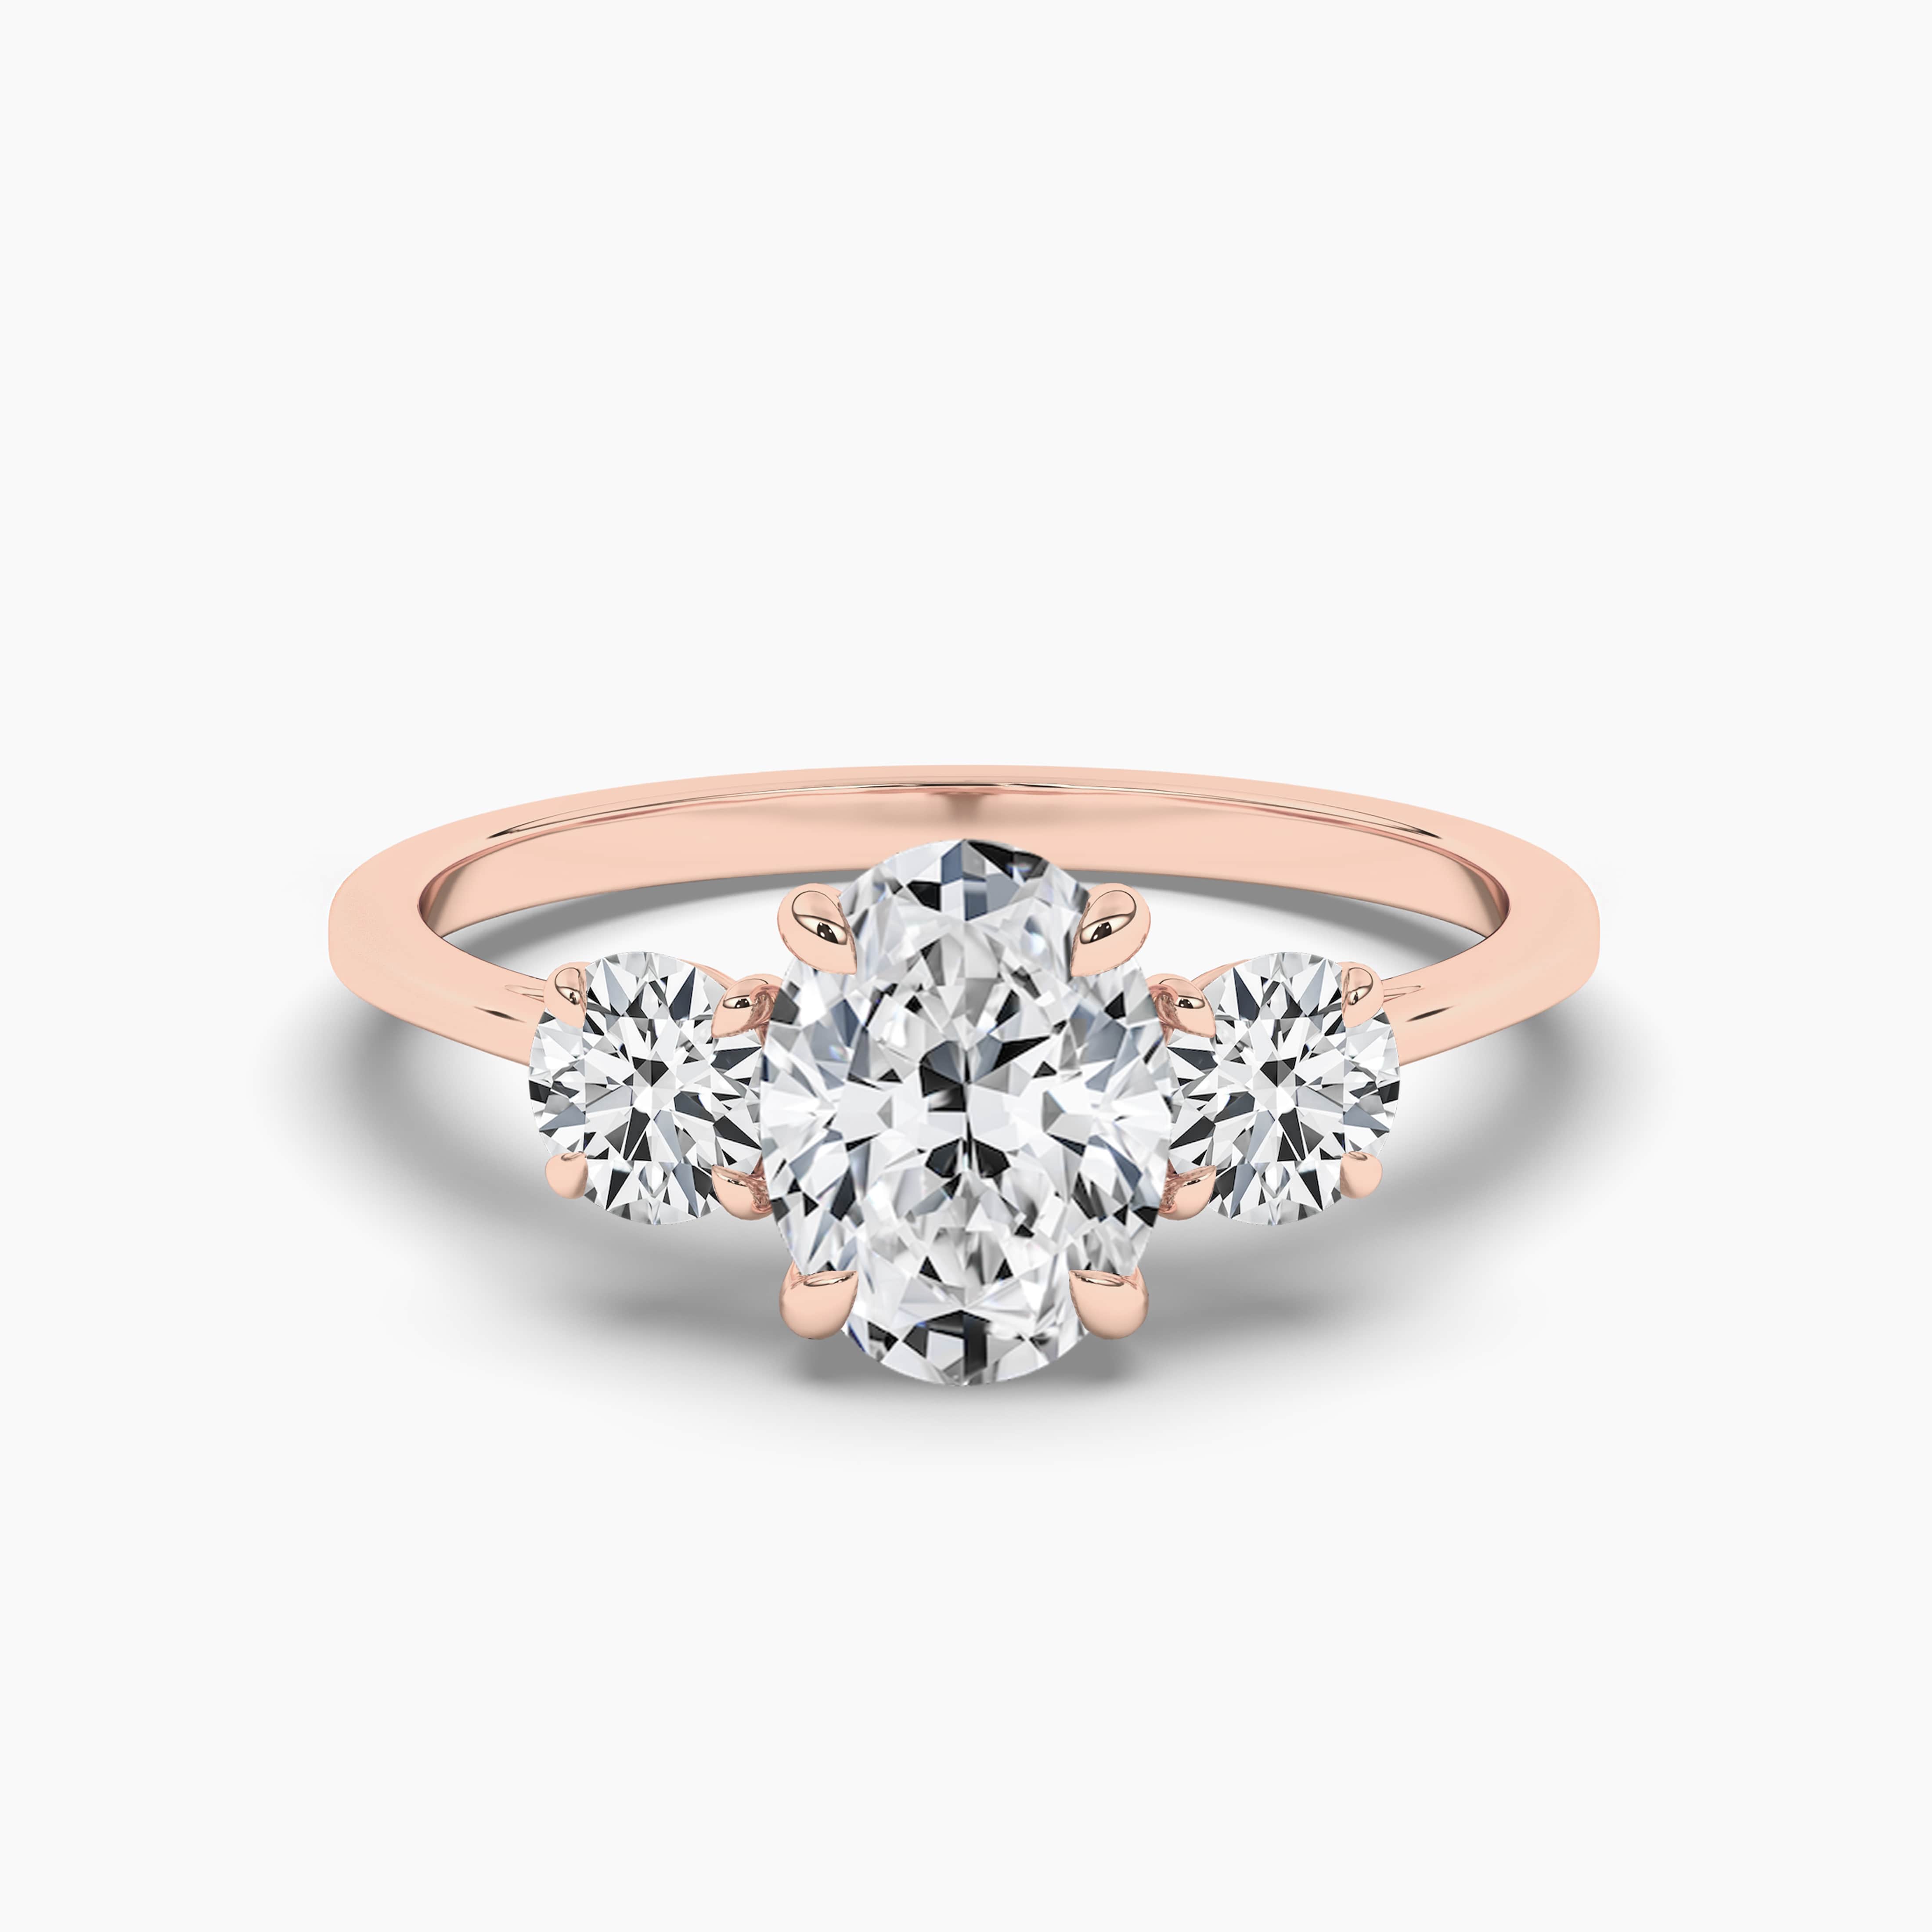 OVAL CUT DIAMOND ENGAGEMENT RING WITH A THREE STONE  IN  ROSE GOLD